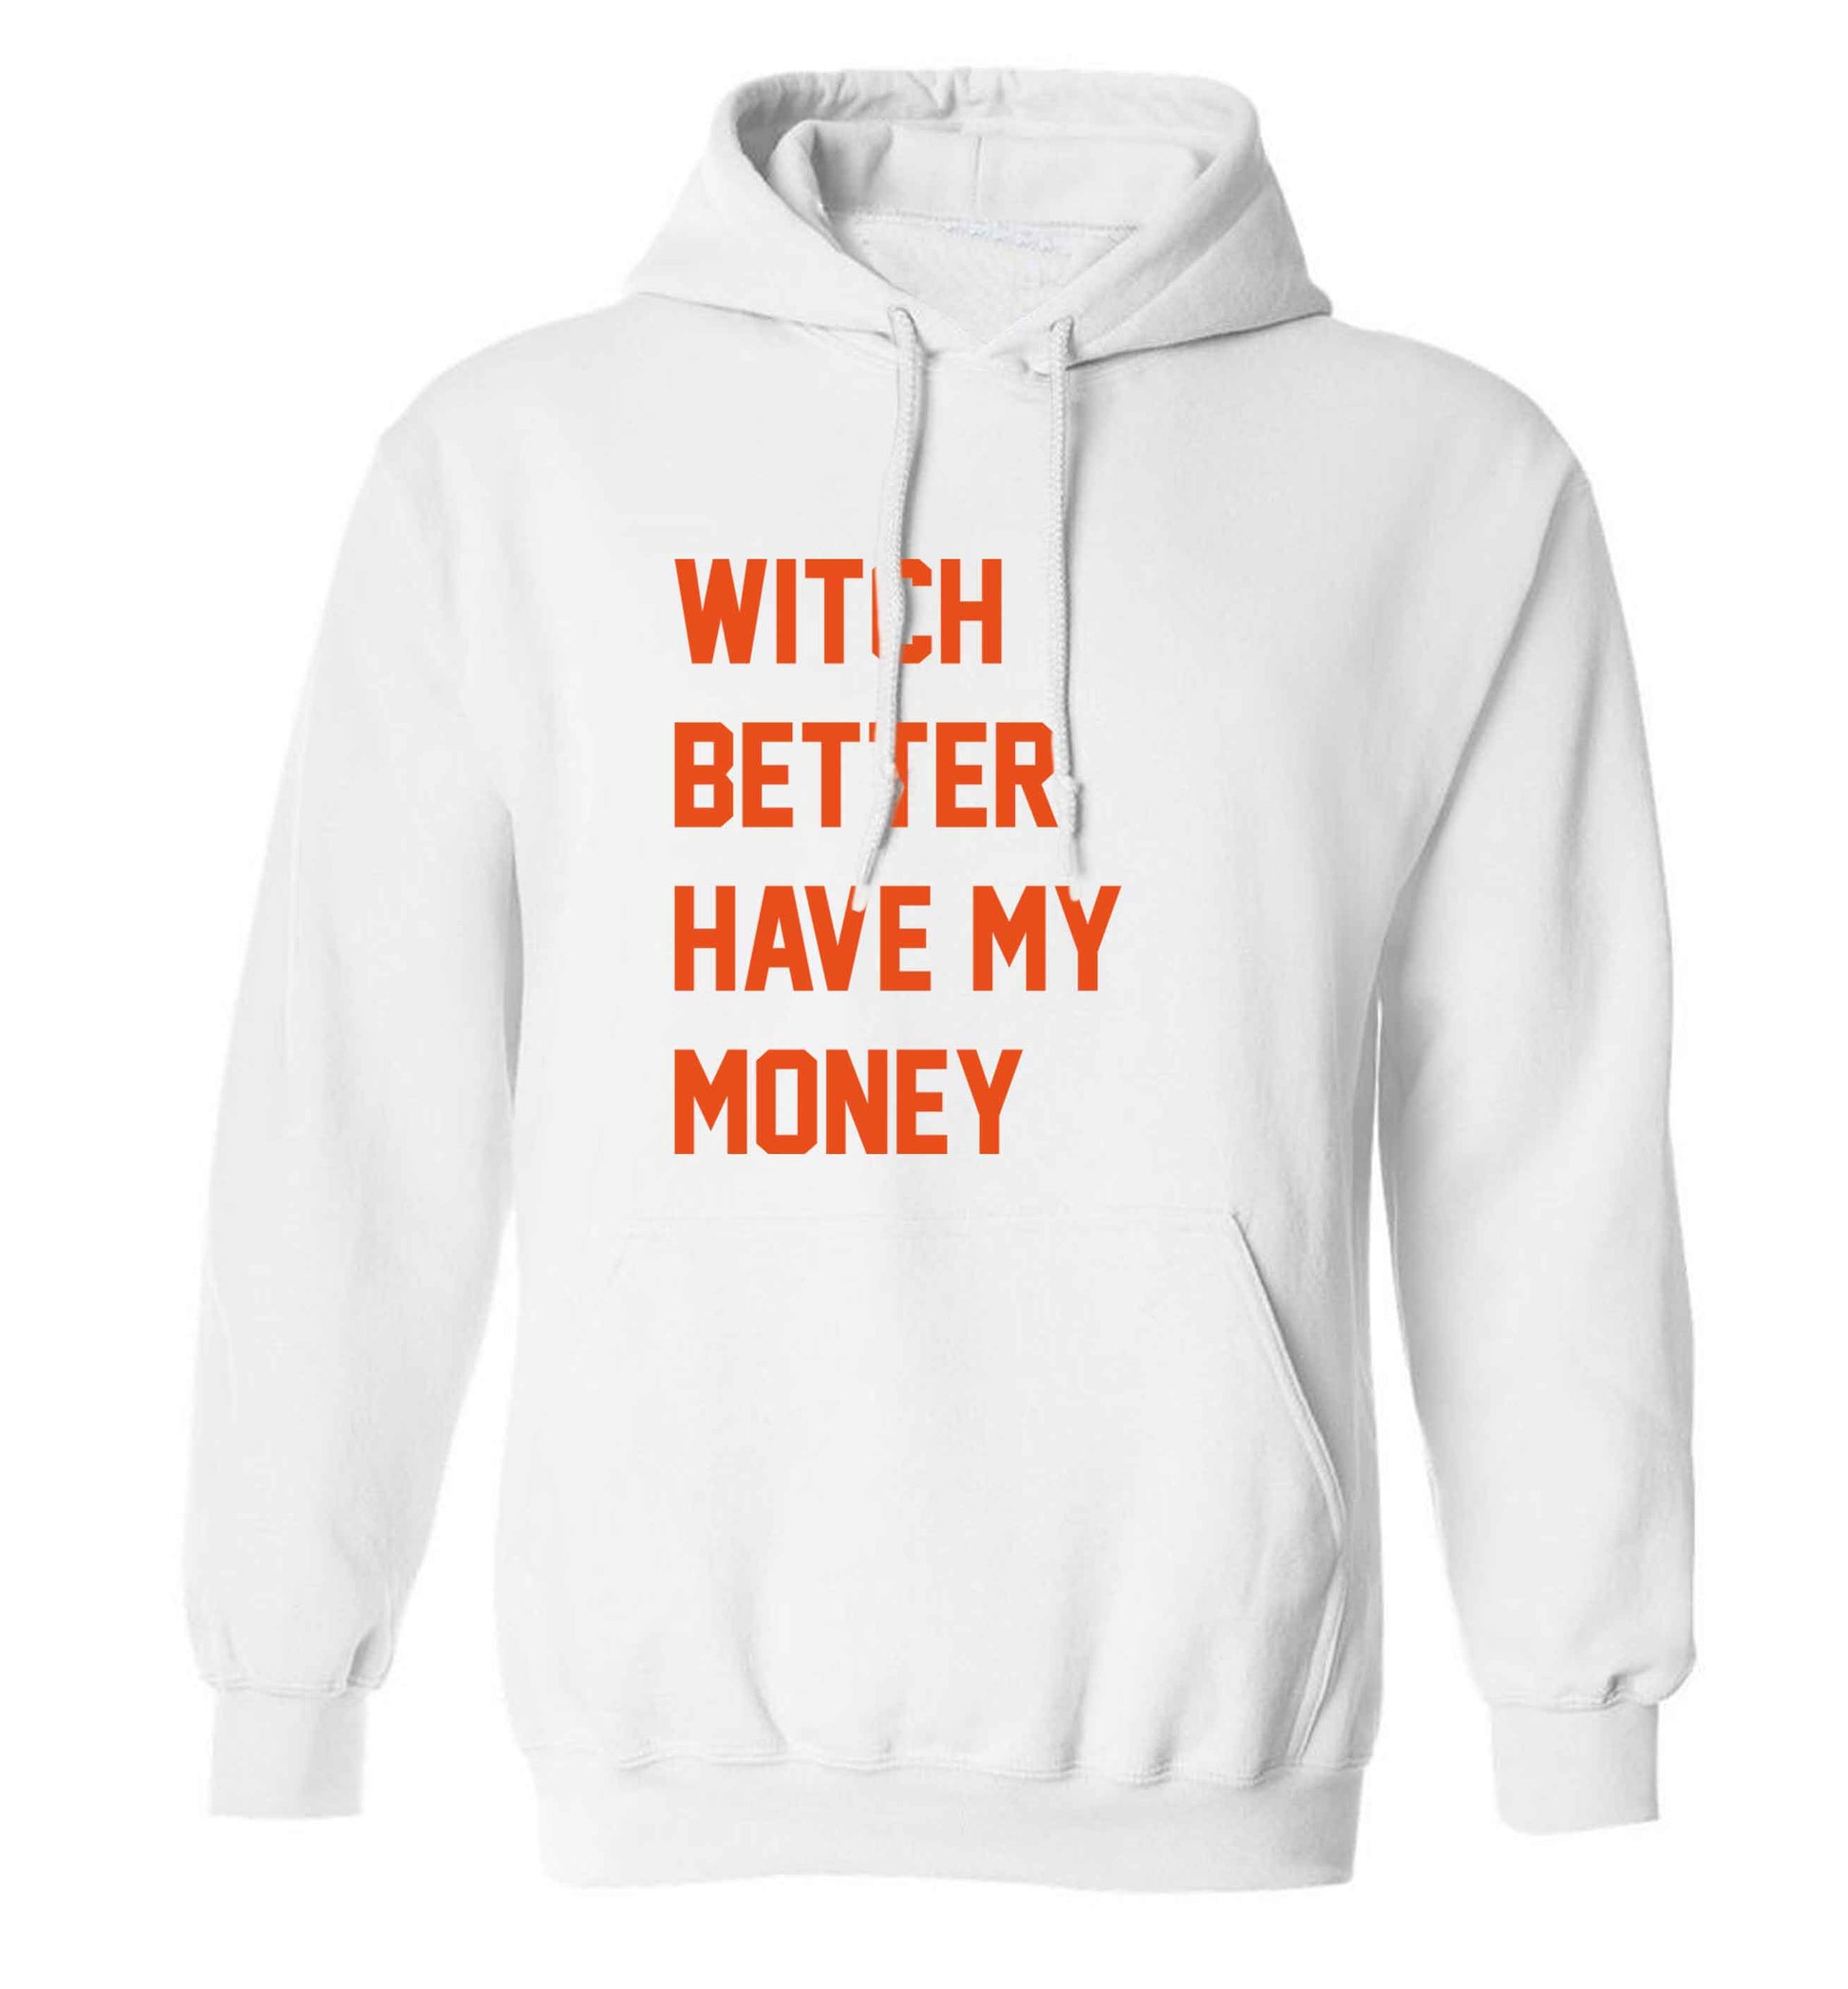 Witch better have my money adults unisex white hoodie 2XL